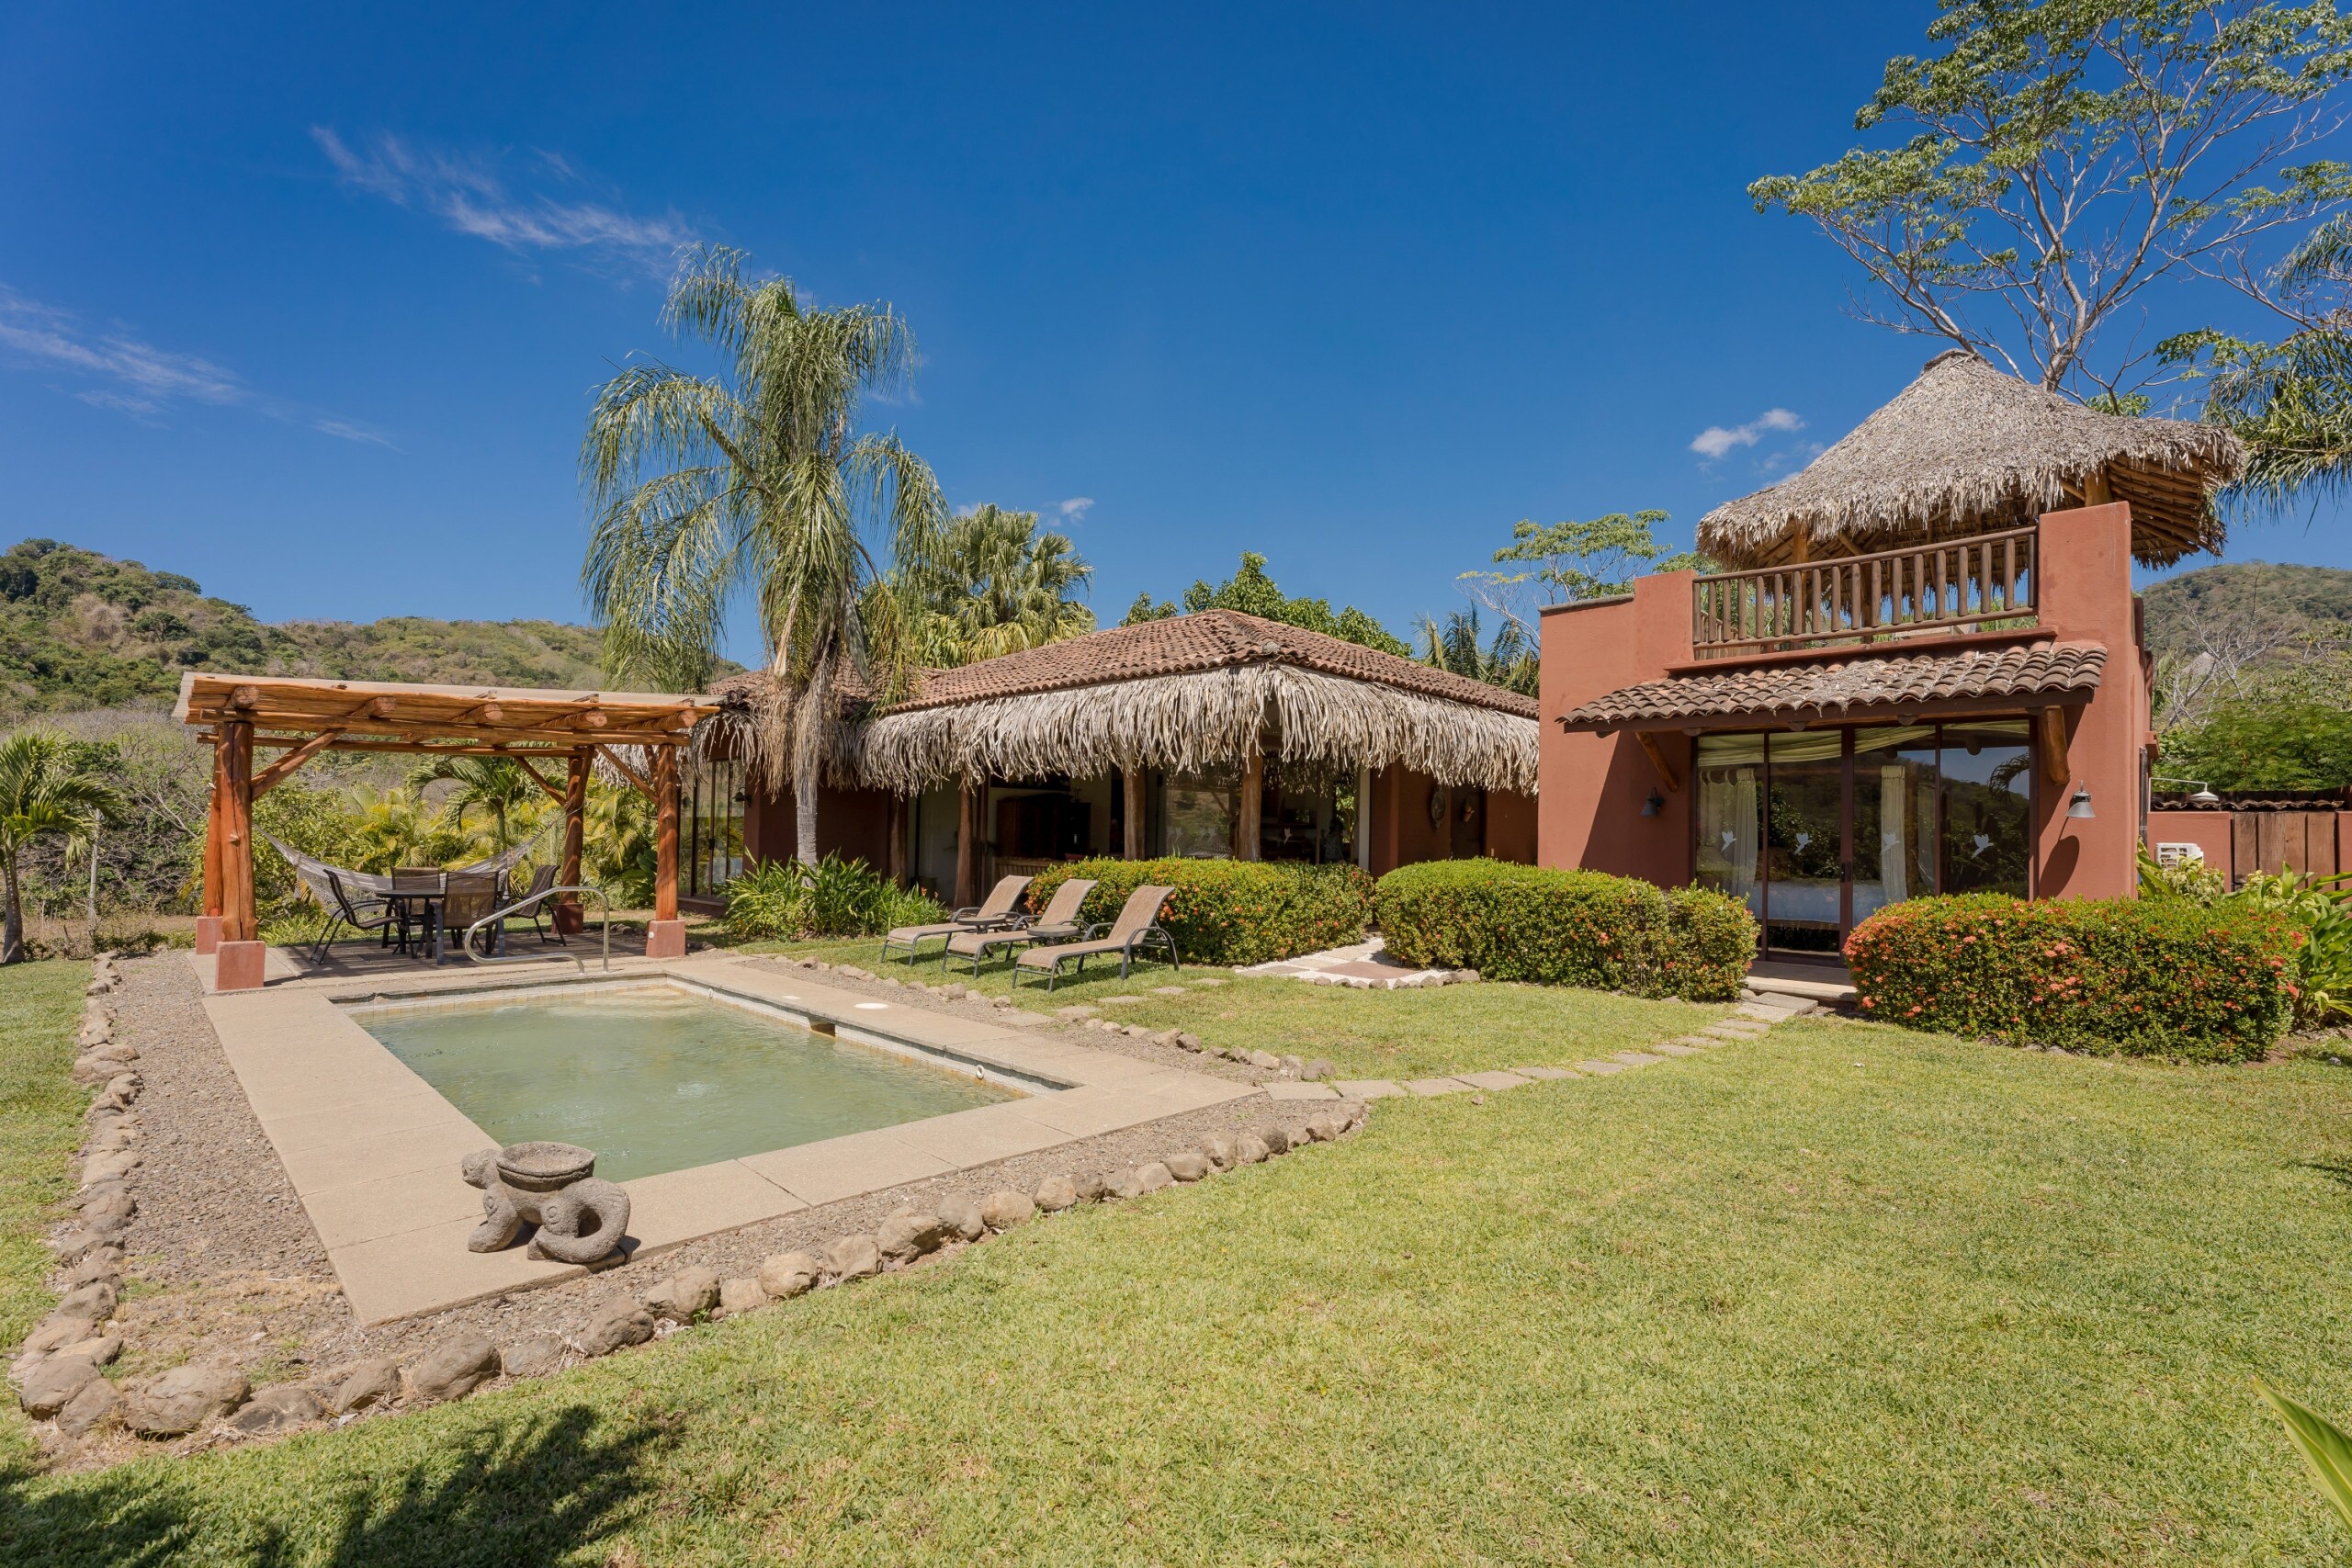 Property Image 1 - Amapola, a charming, private, and rustic-style 3 bedroom villa in the middle of nature